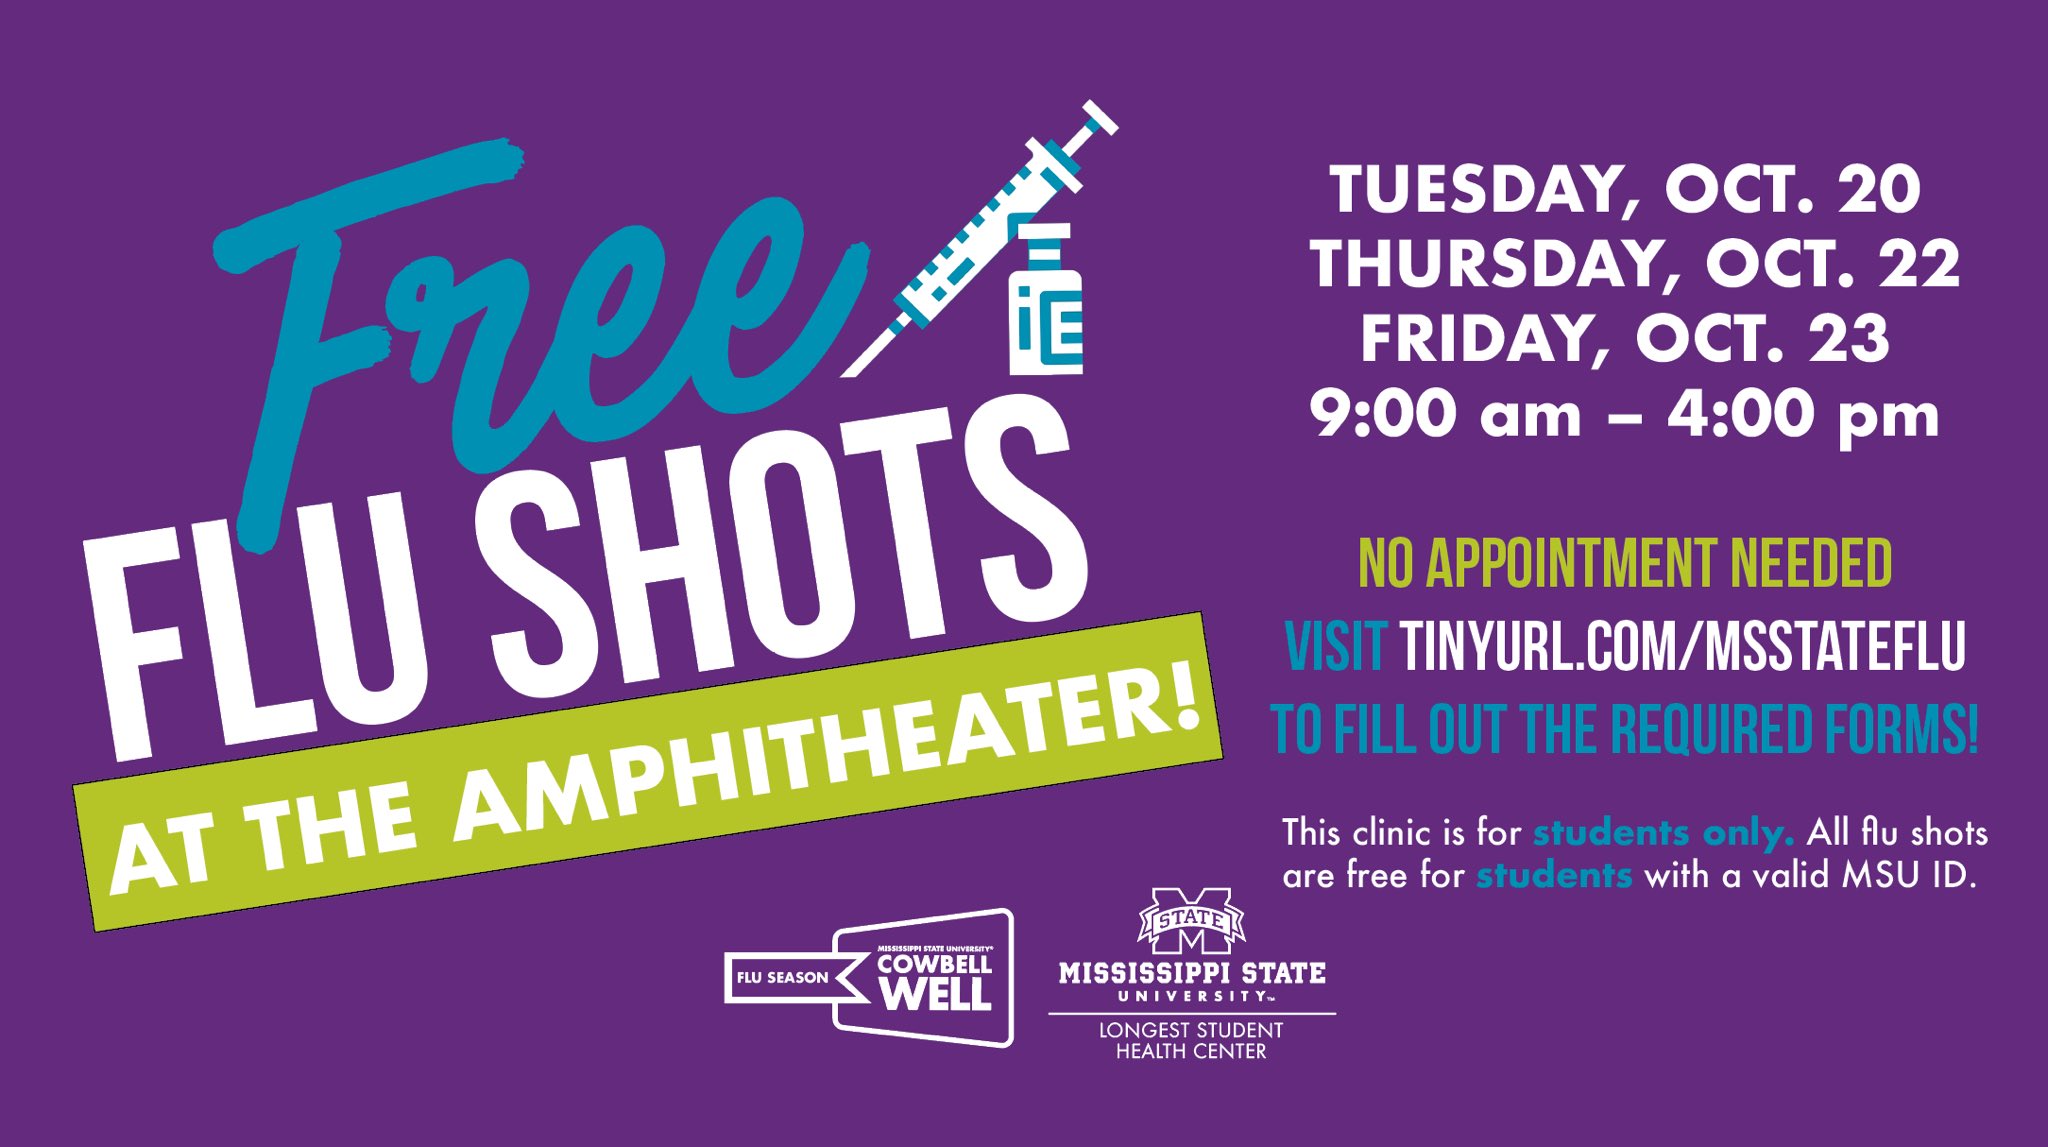 Blue and purple graphic promoting free flu shot clinics for MSU students